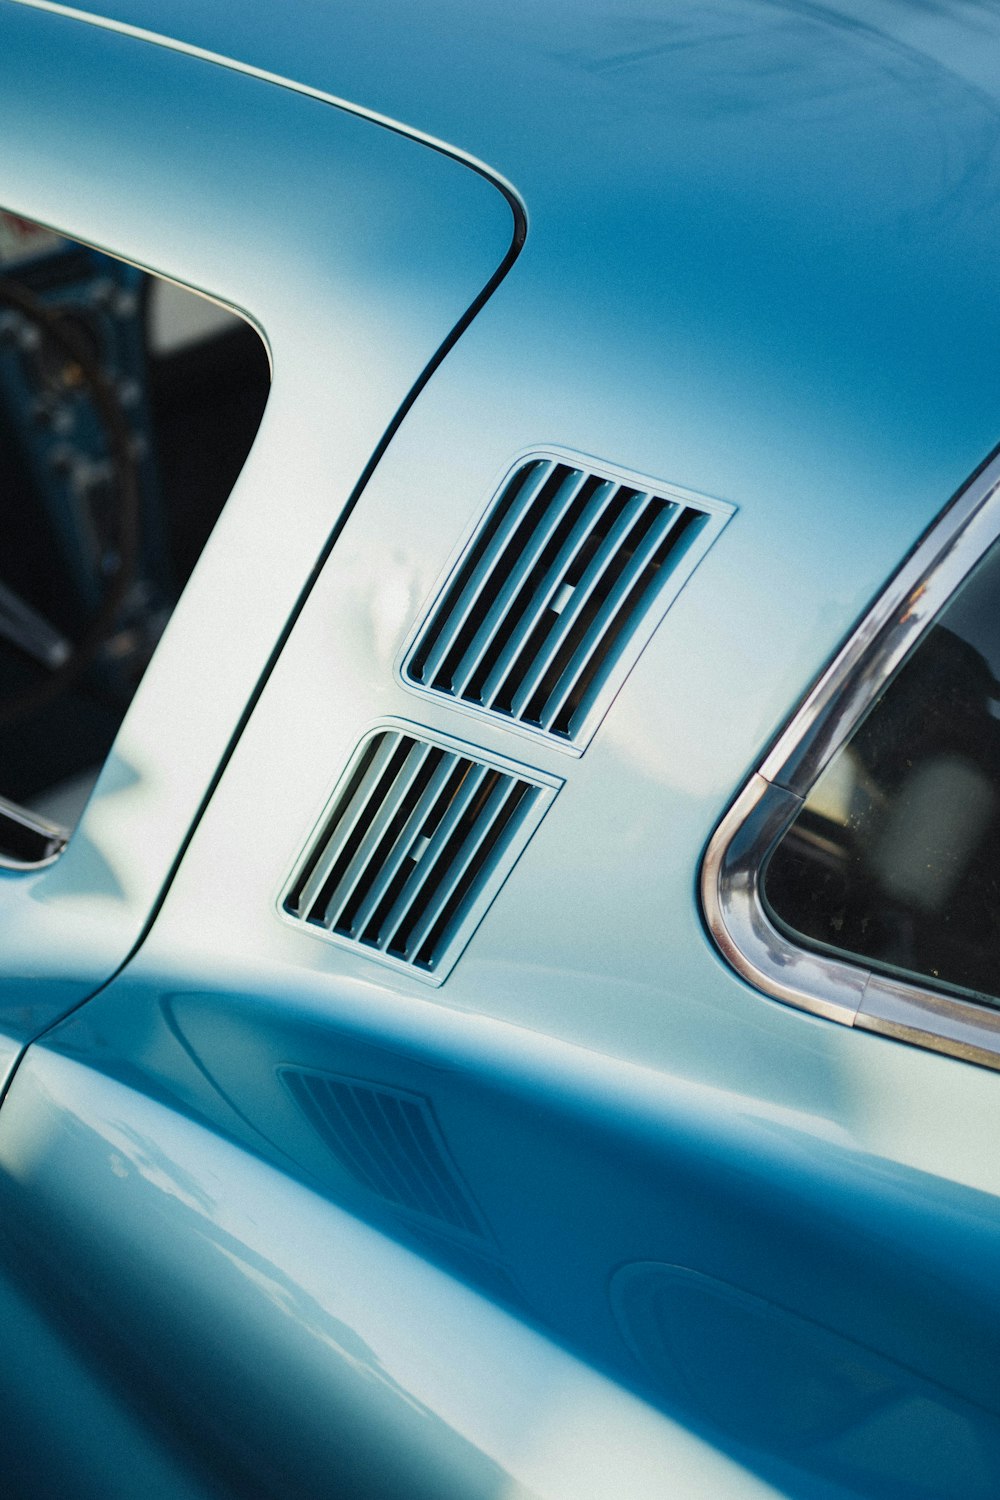 a close up of the front of a blue sports car